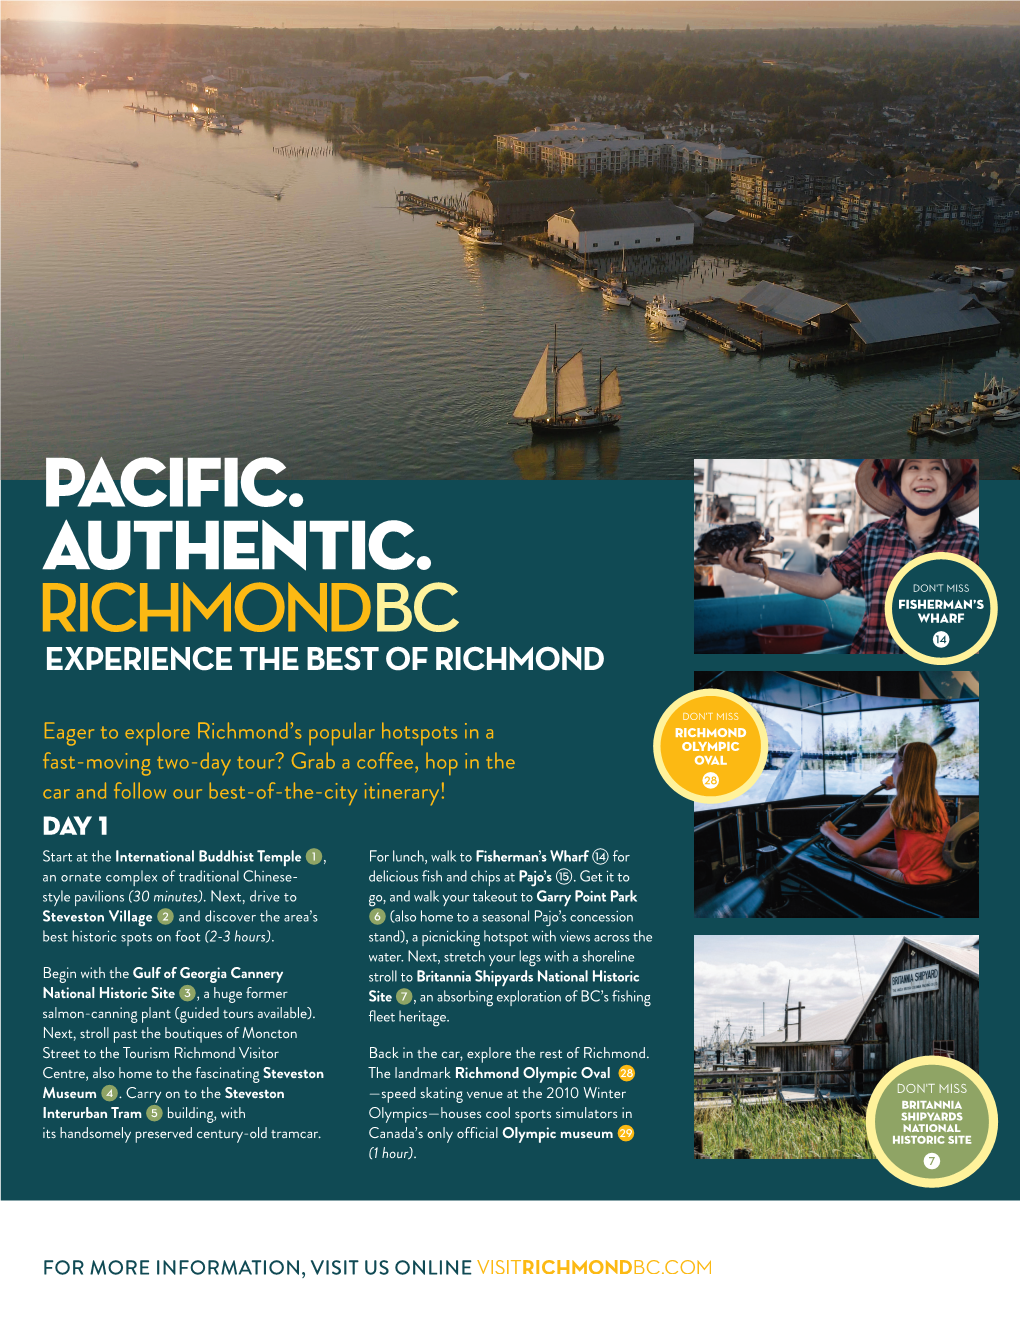 Experience the Best of Richmond